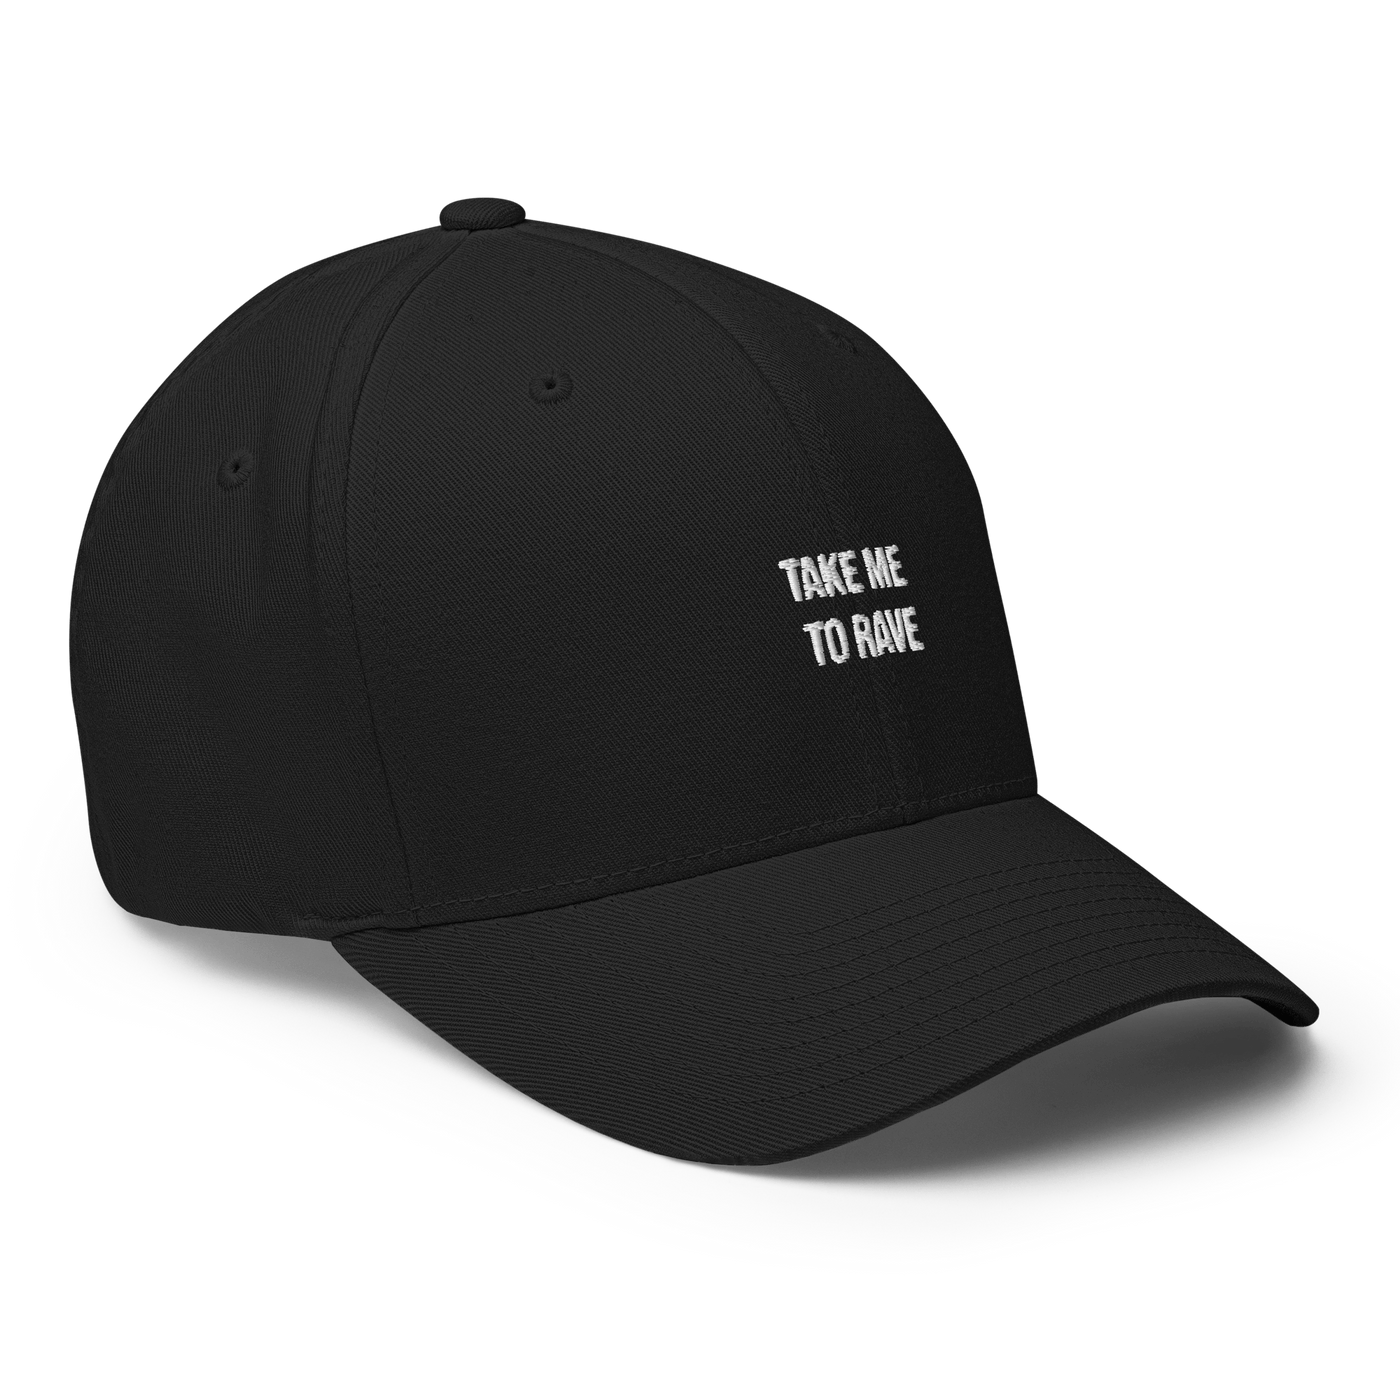 Take me to rave Flexfit Cap - Black - S/M - Just Another Cap Store